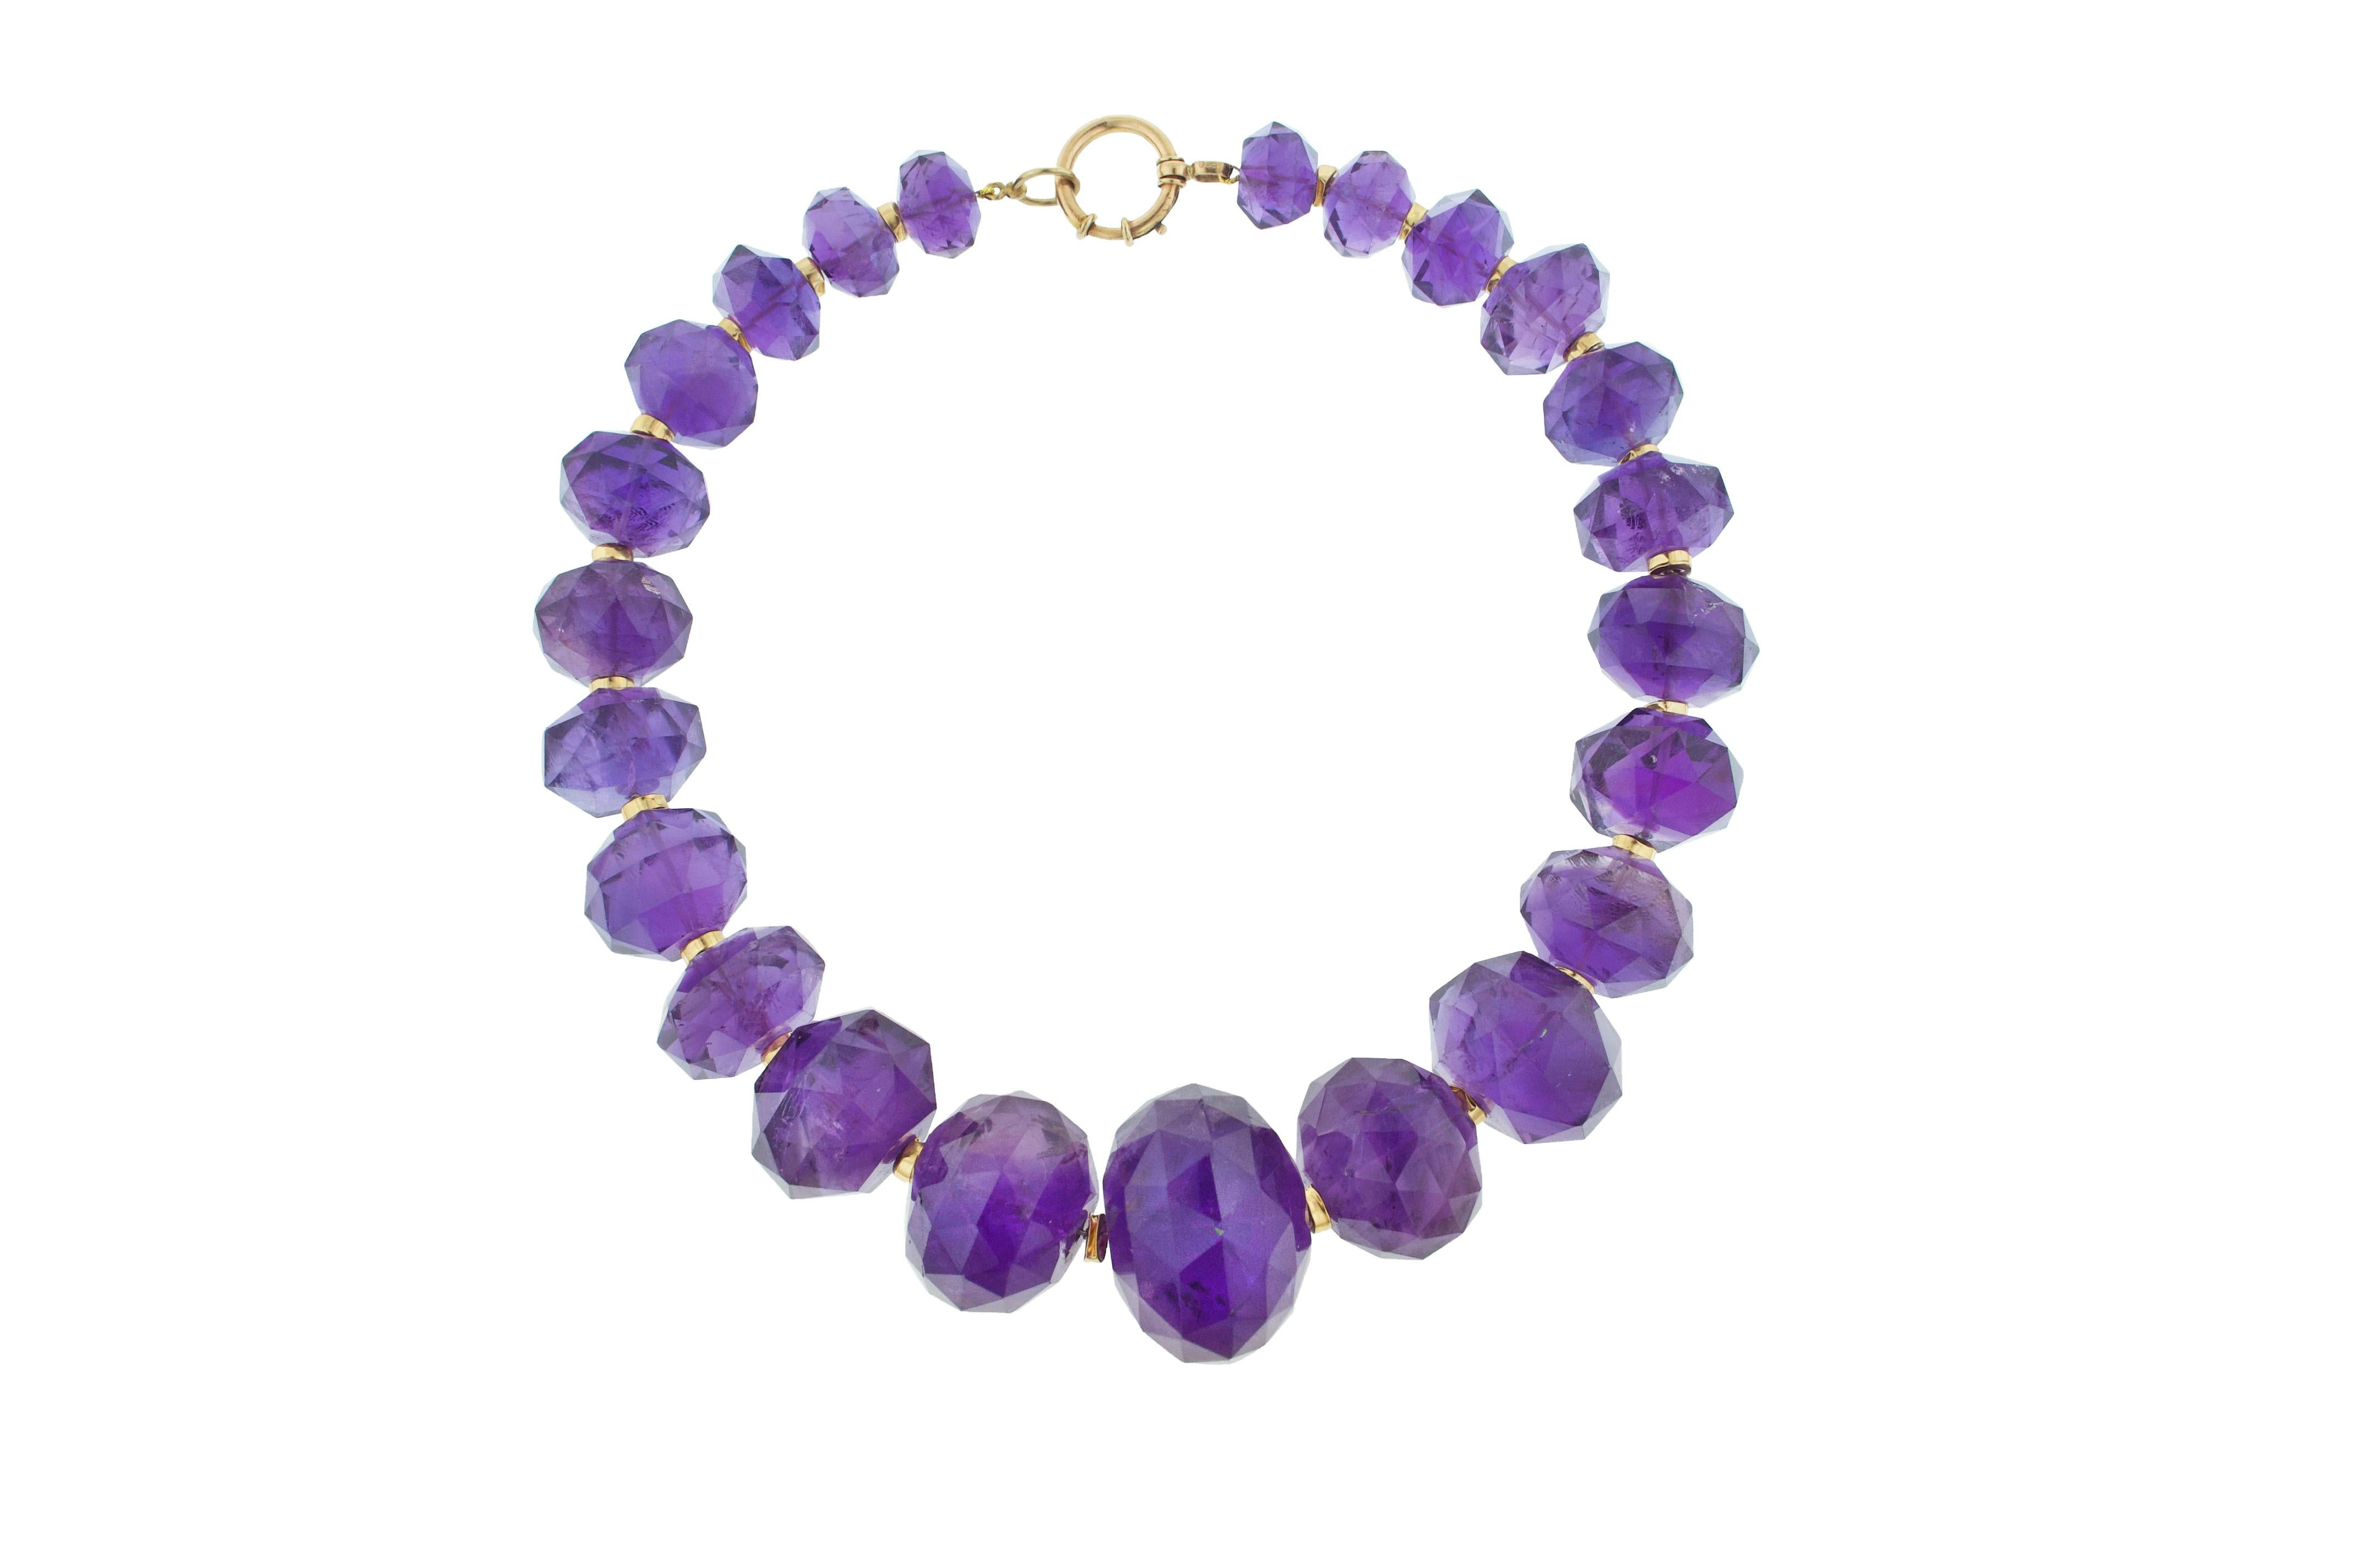 This beautiful estate piece is comprised of 23 faceted amethyst beads

9 karat yellow gold rondelles between each amethyst bead.

Length 19 inches
